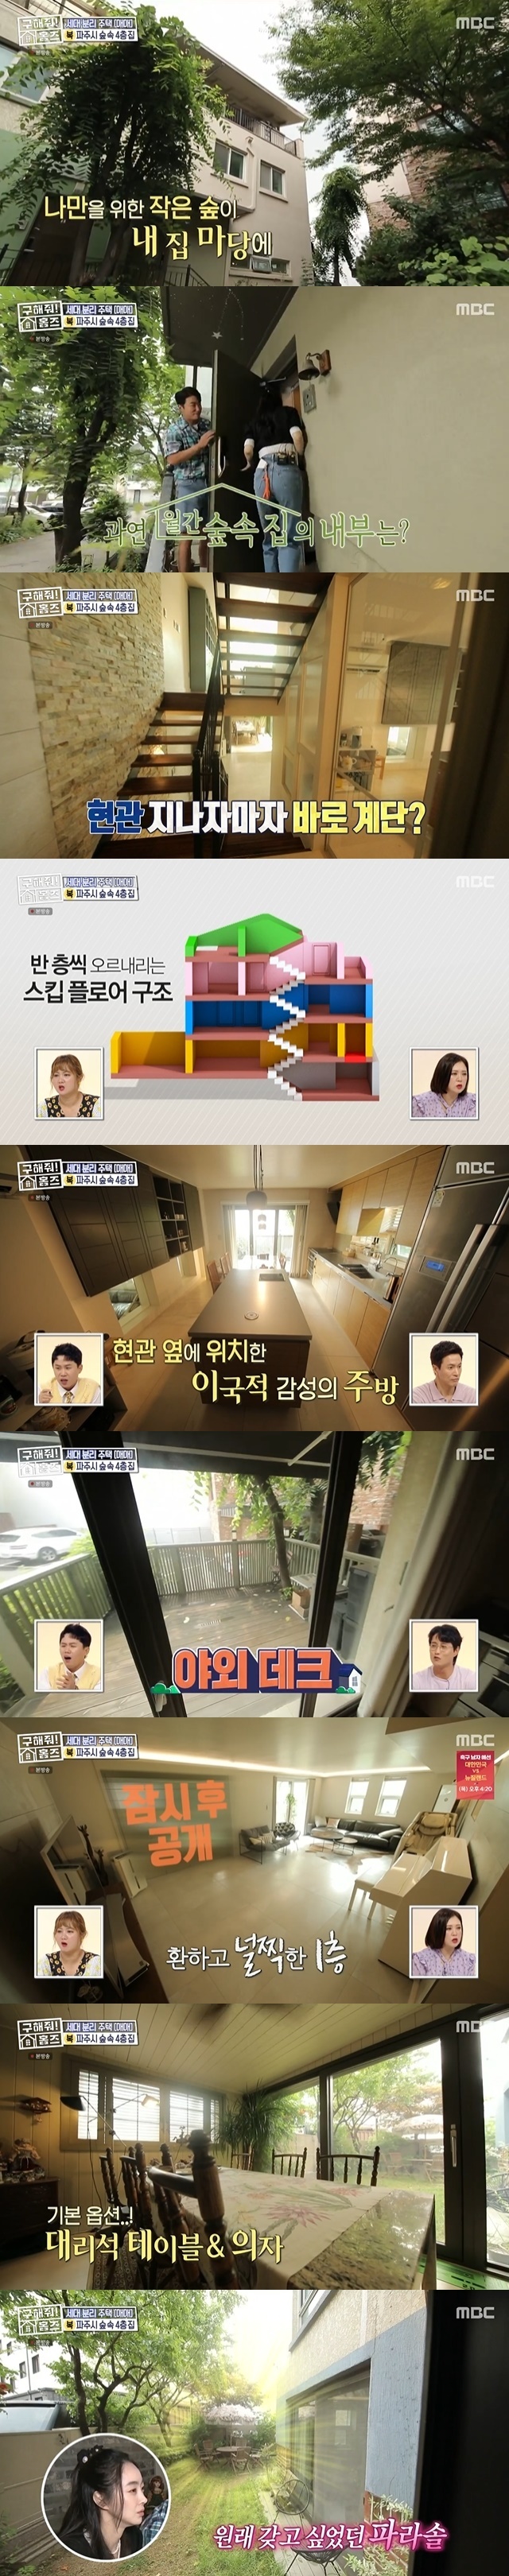 Kim Soo-mi Daughter-in-law Seo Hyo-rim was also introduced to the four-story house in the forest.MBC entertainment Where is My Home (hereinafter referred to as Homes), which was broadcast on July 18, featured a newlywed couple, The Client, who visited three or more single-family houses or town houses to live with their mother-in-law.The Client hoped for a structure that could separate generations of Paju or Goyang city, and needed a garden with a garden and a space for couples only.The budget was 7-8 billion units for Marketing, and up to 900 million won for a good house that meets the conditions.Bok Tim Cody Seo Hyo-rim, Jang Dong-min headed to a fairytale village in Paju Opposition Party.There is an opposition station on the Gyeongui Central Line at 10 minutes walk, and this place, which has Unjeong Lake Park at 15 minutes walk, attracted attention because there was a Yarosu road where all the hot spots of the opposition party were gathered on foot.The neighborhood has been very favorable since the first impression.Especially, Seo Hyo-rim admired that Sumis mother would have liked it so much. Jang Dong-min said, The house full of attractive points.There is a forest-like space in front of my house, so the name of this house is Monthly Forest House. Deok Tim Lim Sung-bin also forgot to compete for a while and said, It does not seem to be our country.I think Im on a trip, he said.The interior of the house was a skip floor structure that climbed up and down half a floor, and there was a porch on the 1.5th floor.When you open the door directly from the front door, The Kitchen, a sensual interior that has completed the 2018 remodeling, appeared.Also inside The Kitchen was an outdoor terrace with folding doors.Seo Hyo-rim was absolutely infatuated with this house.Seo Hyo-rim noted that he was a privately coveted house and that I live alone Kyung Soo-jin chose a house from Save Me Homes.Seo Hyo-rim, like Kyung Soo-jin, expressed his desire directly and focused his attention, saying, If the Client does not have this house (I want to have it).In addition, the house had a unique charm on each floor, and the bright, spacious living room on the first floor had a dining room full of European Feelings in the folding door.The garden, which is an option for parasol sets, was also visible at a glance, and then, down to the 0.5th floor, a dress room with a laundry room and a bathroom of Feelings like a store was resilient.Later, on the second floor, a living room with a good mining room and a green custom room for the mother came out, and a space that can be used as a childrens playroom on the 2.5th floor.Seo Hyo-rim reiterated his house, saying, I think our Joey would really like it if he played here, I dont have to go to the kids cafe.